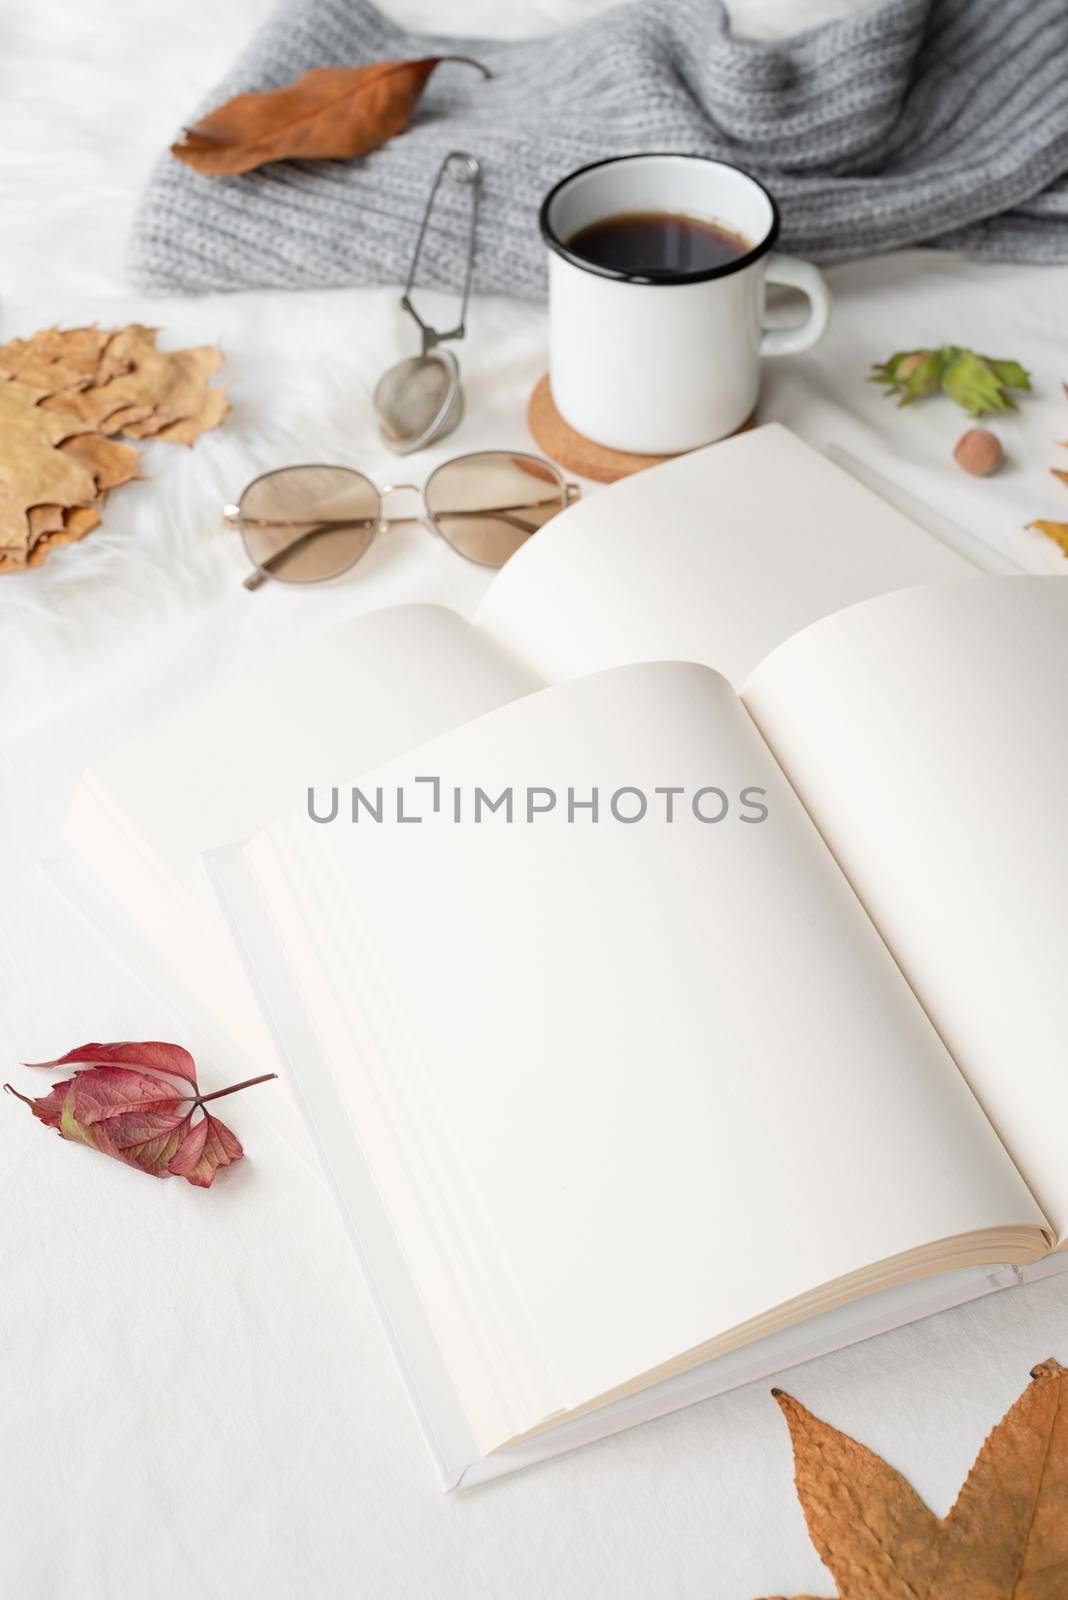 Back to school. Cozy autumn. Study and education concept. white blank book with autumn leaves and cup of hot tea on old table , mockup design